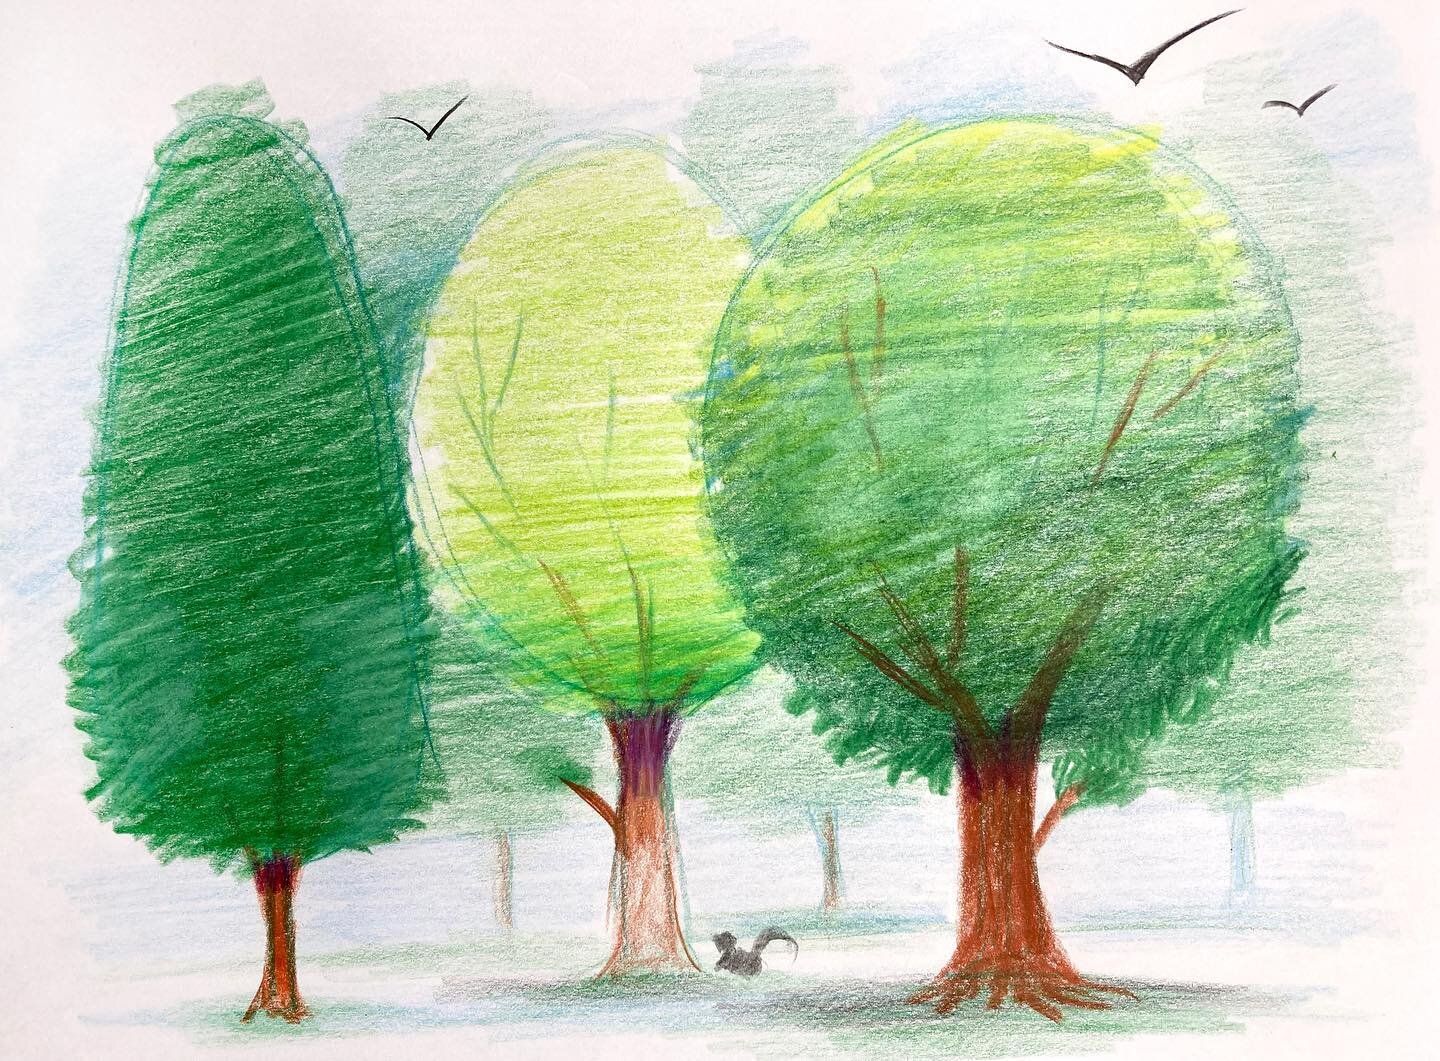 This is the colored pencil artwork trees showed to our colored pencil students! Message us if you are interested in taking colored pencil class with us!! 😀😀😀😀
#charlotteartstudio  #parents #art #fineart #creativity #arteducation #elementaryart #c